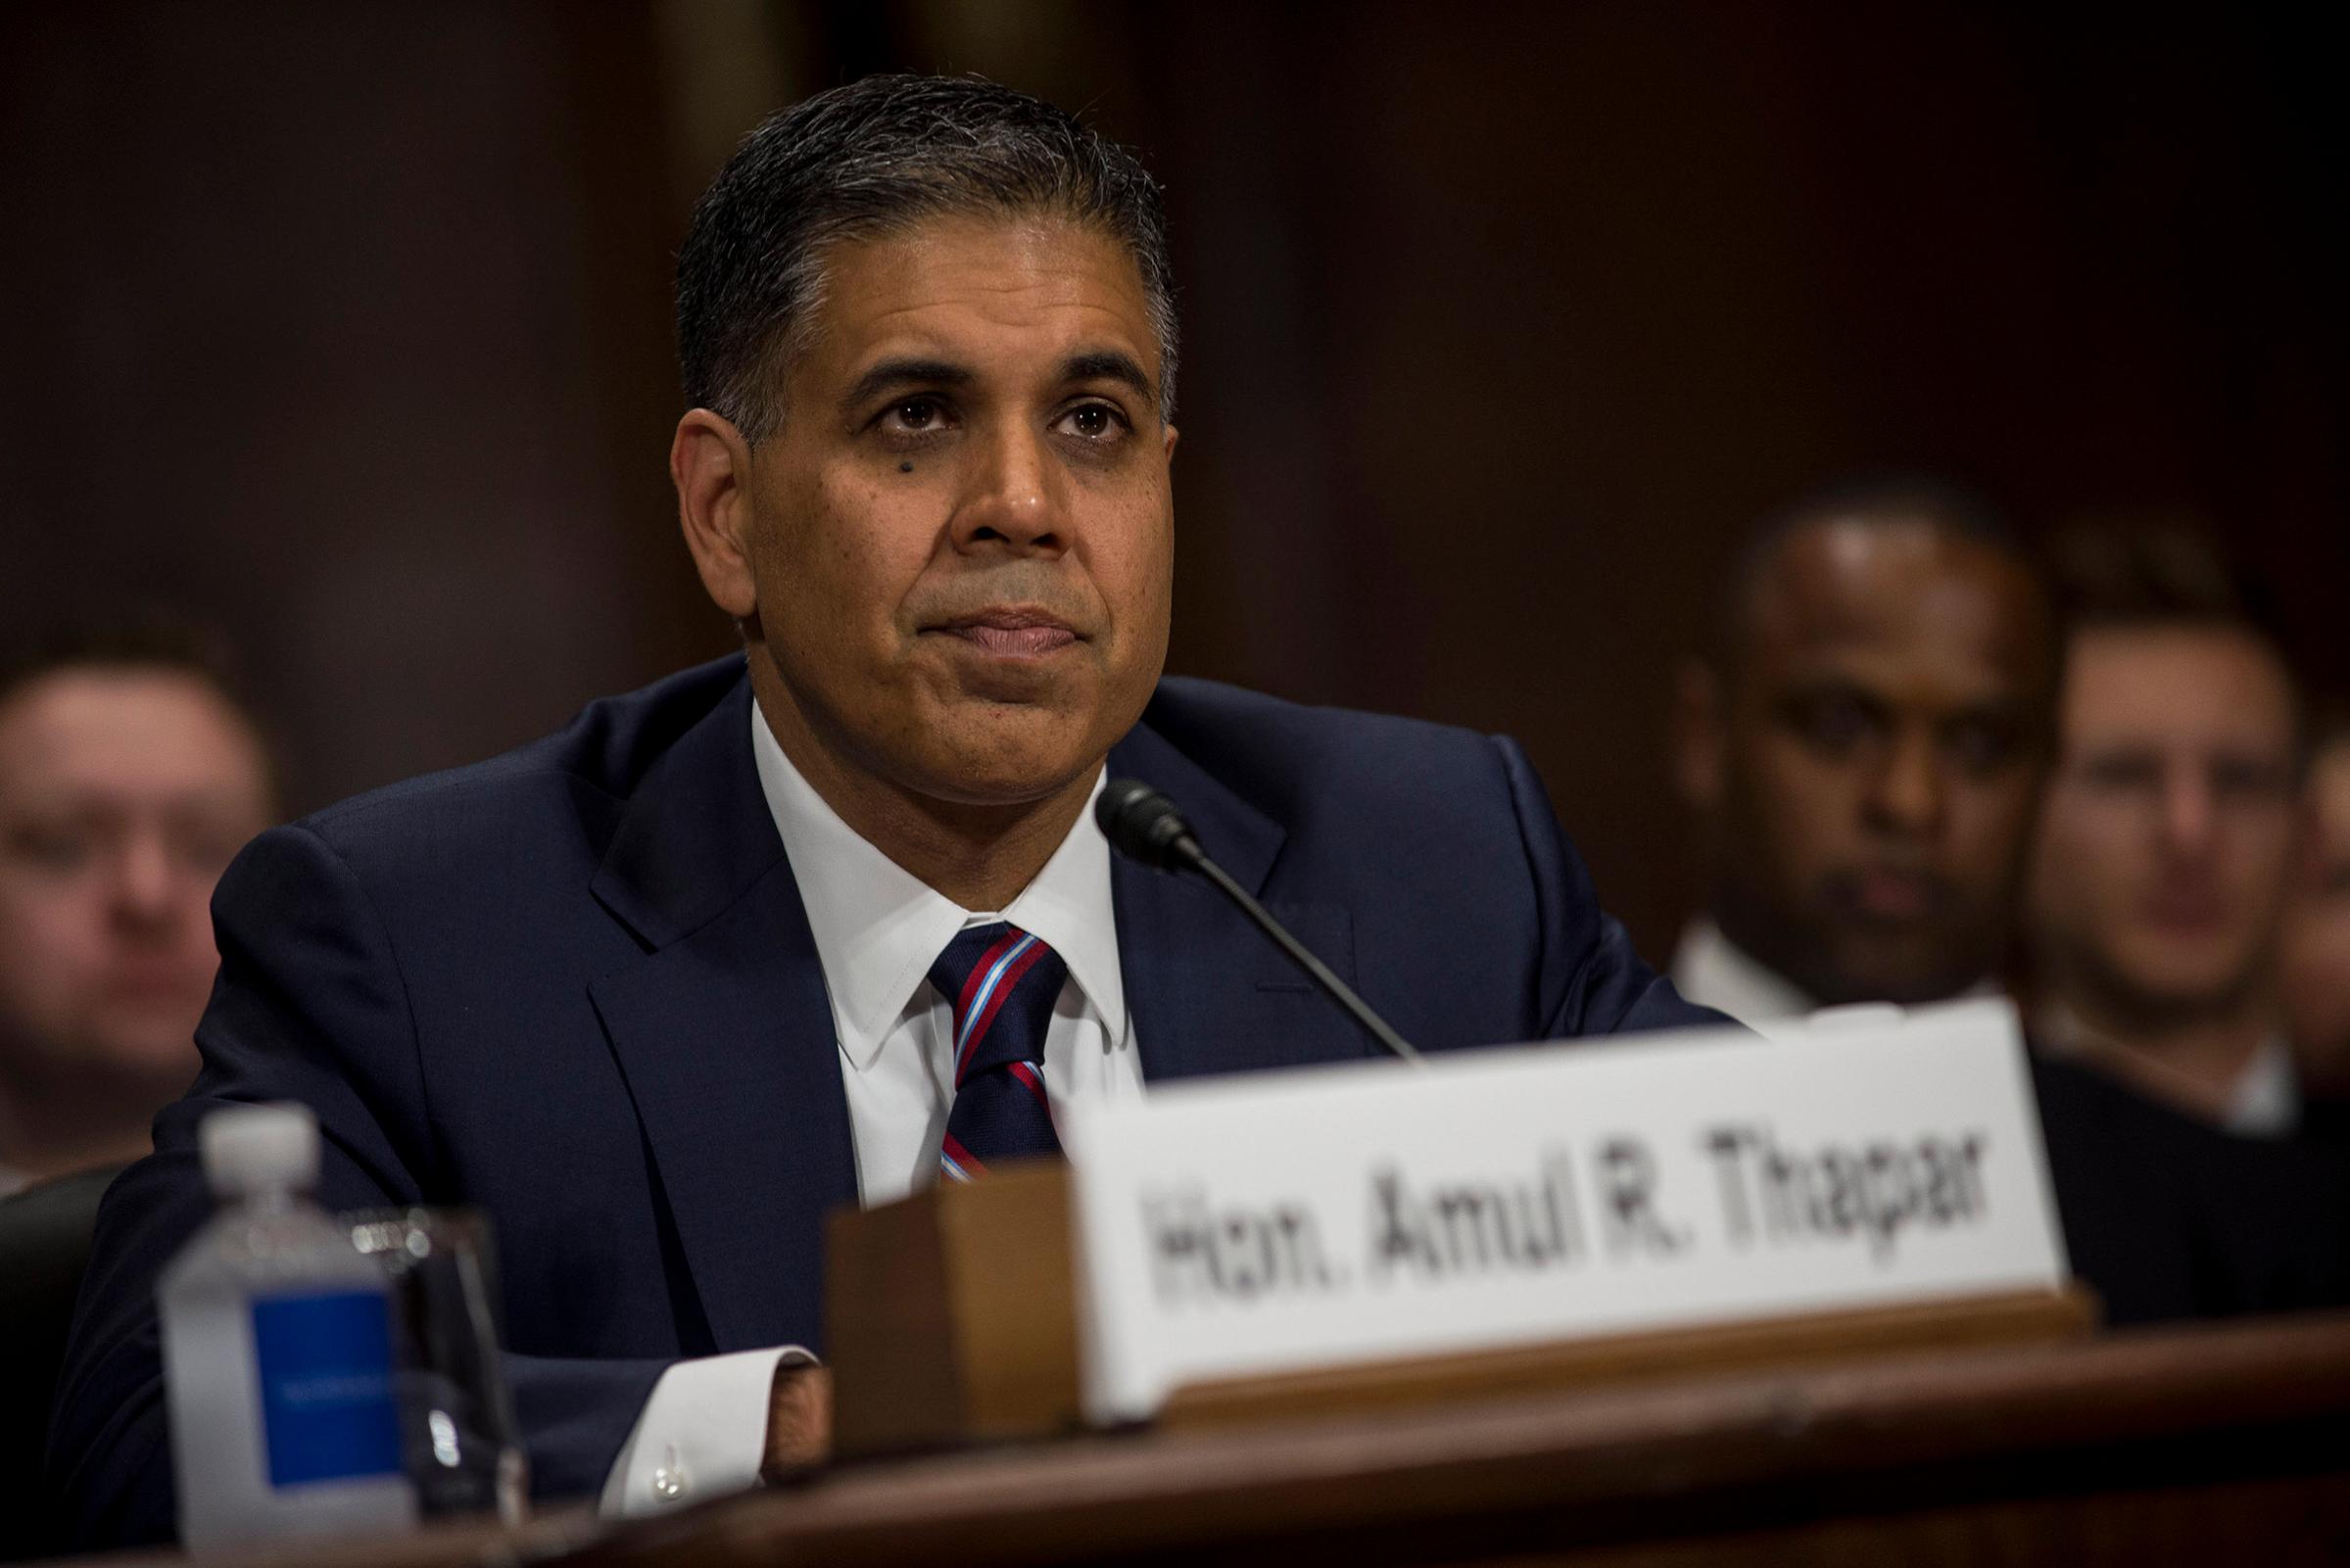 Amul Thapar, a federal judge in Kentucky nominated for a seat on the U.S. Court of Appeals for the Sixth Circuit, during a Senate Judiciary confirmation hearing on Capitol Hill in Washington, April 26, 2017.